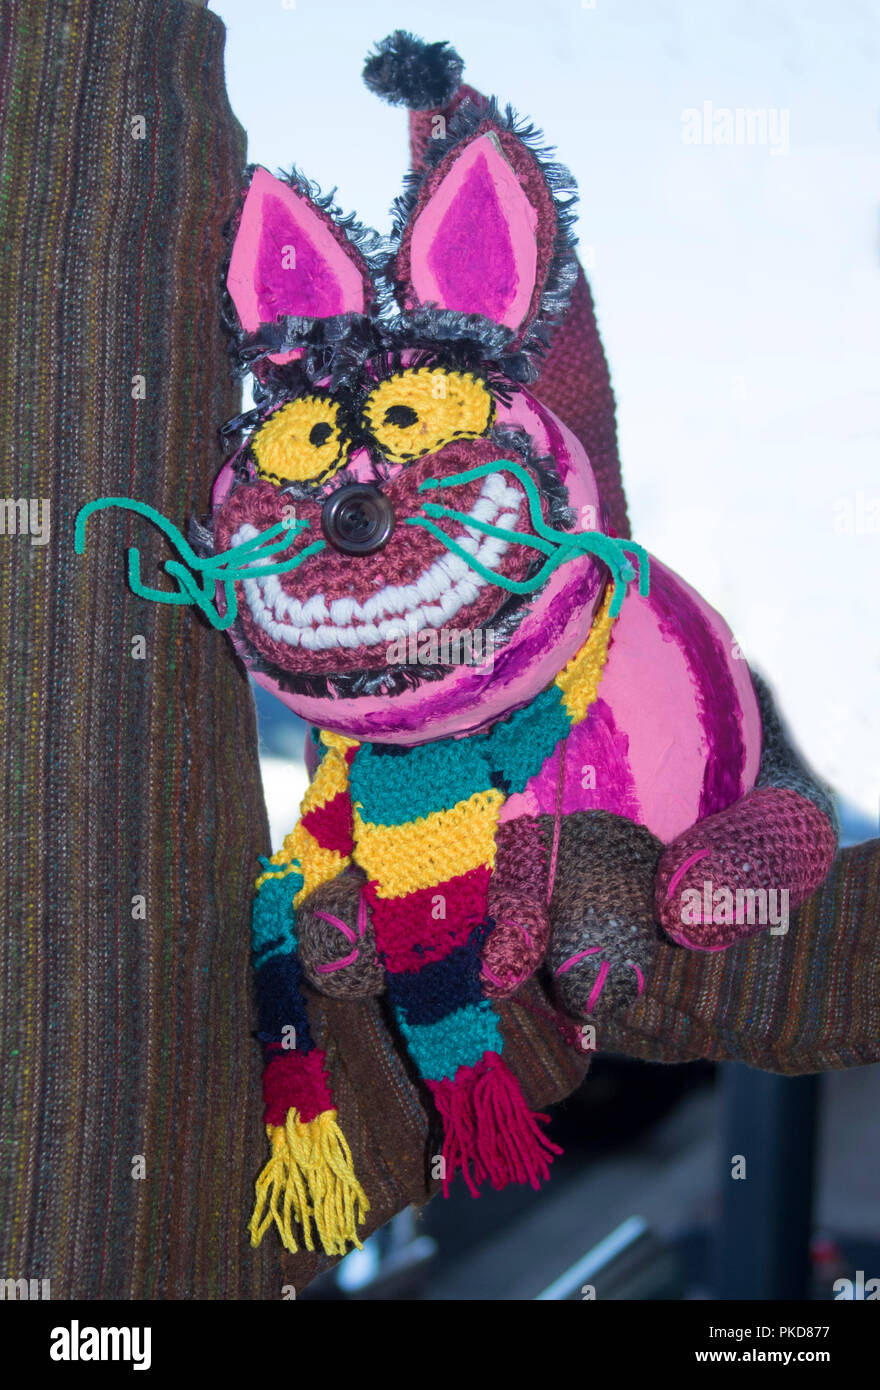 Large knitted craft work, bright and colourful smiling Cheshire cat, on display at Warwick Qld Stock Photo